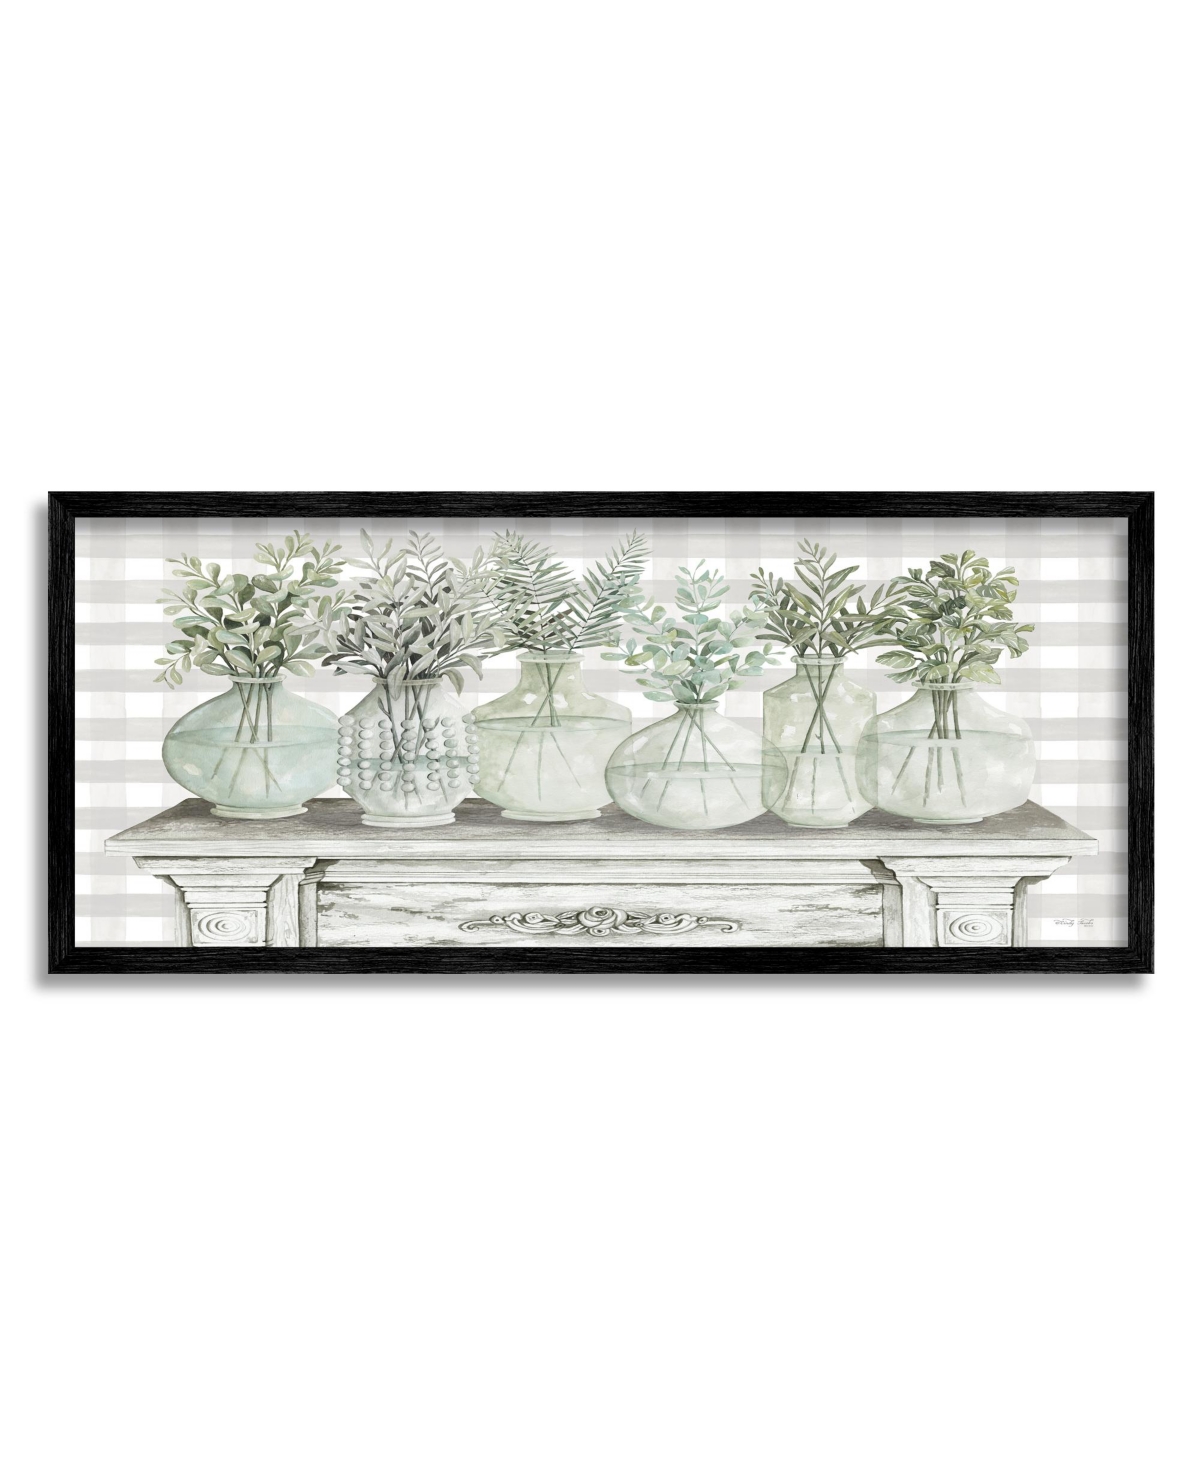 Stupell Industries Country Plant Herb Jars Framed Giclee Art, 13" X 1.5" X 30" In Multi-color